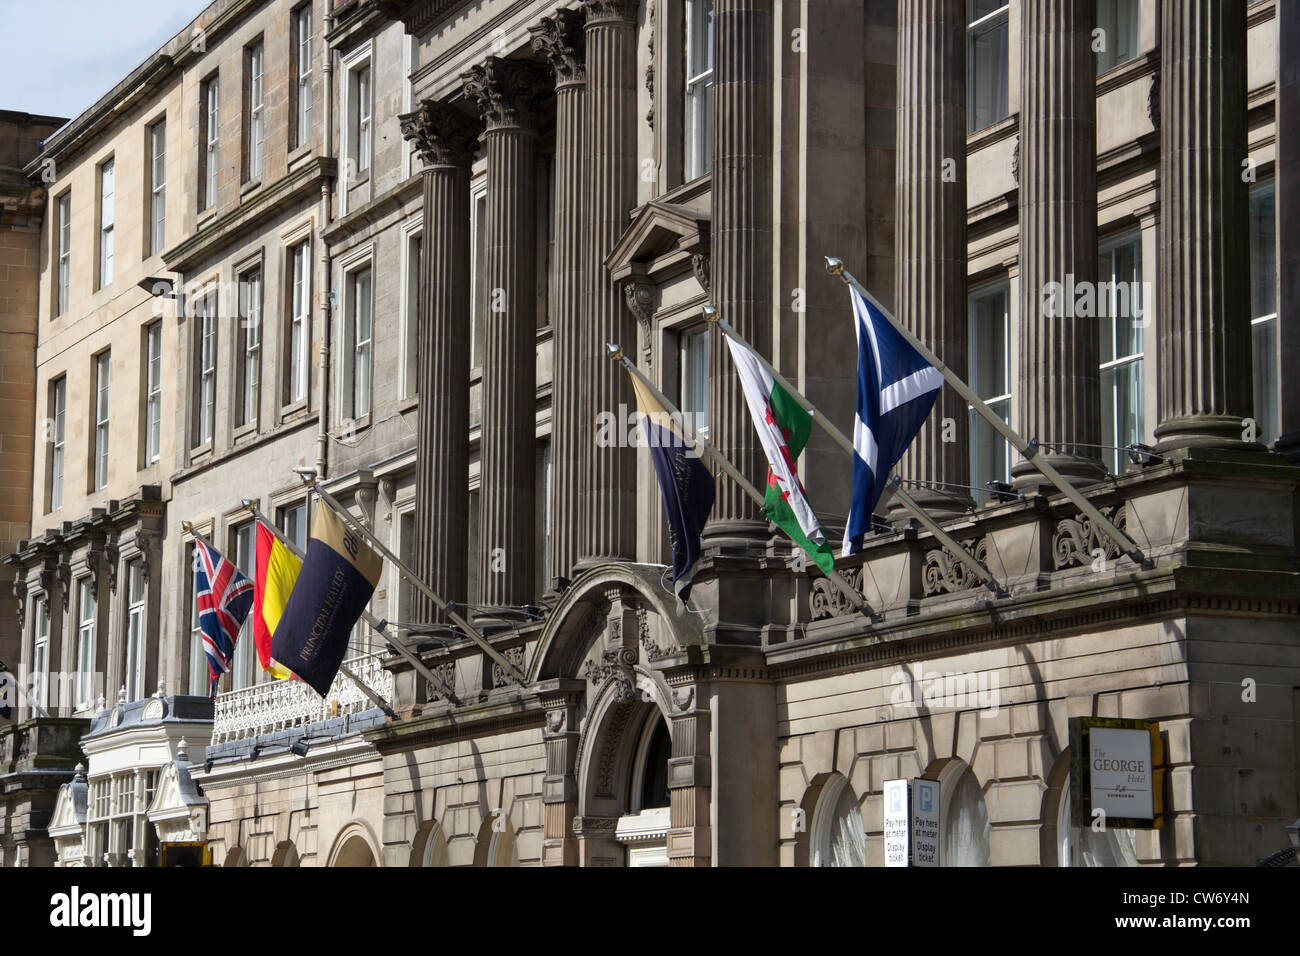 A hotel building in Edinburgh in Scotland, with flags in front. These buildings all have the same kind of architecture Stock Photo